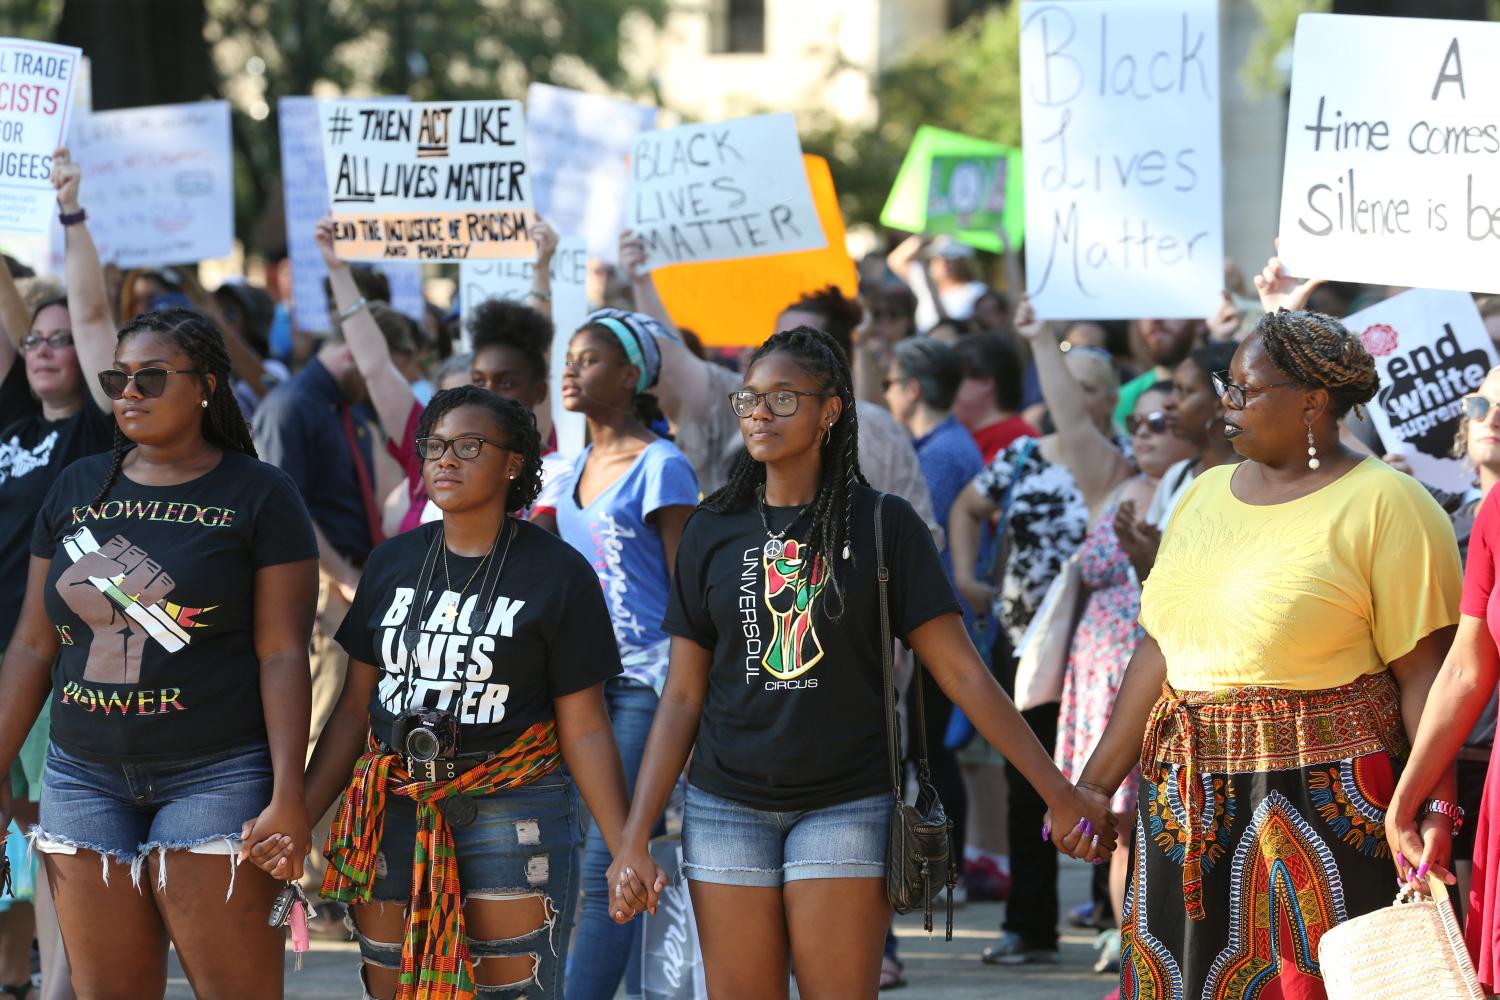 Activists gather during a Black Lives Matter rally in Charleston, West Virginia.